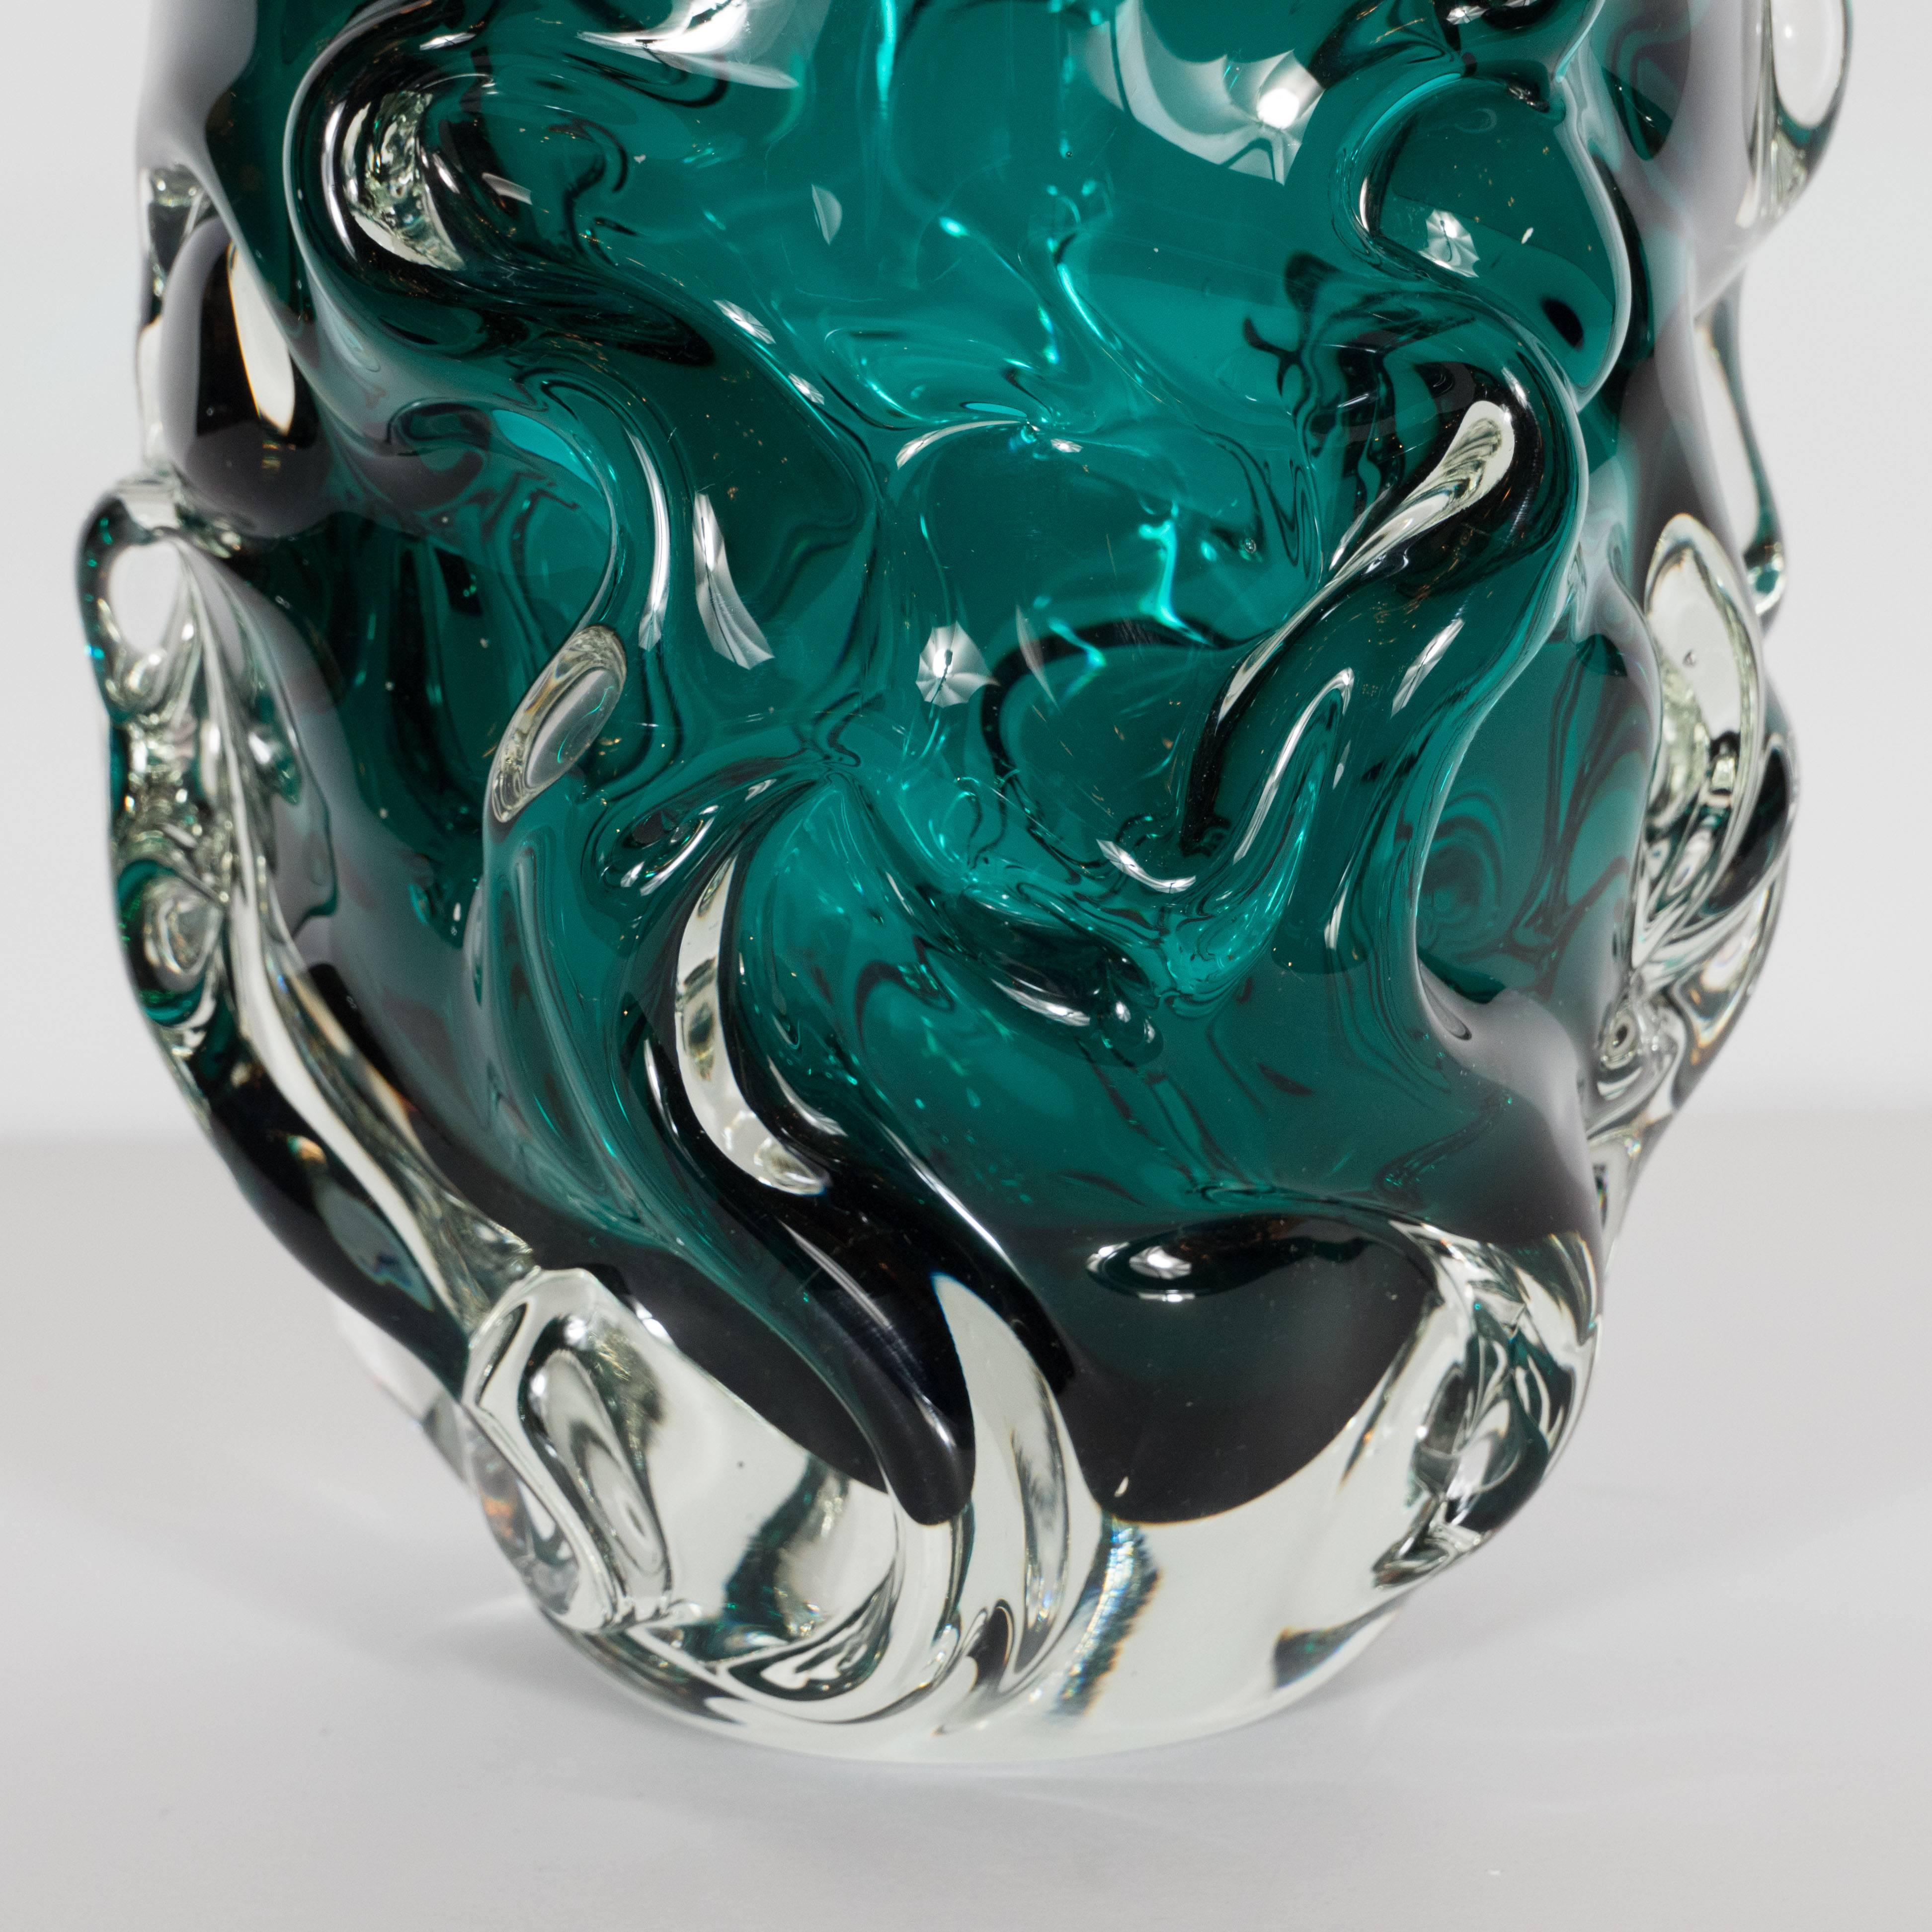 Mid-20th Century Handblown Sculptural Murano Vase with in Translucent and Teal Glass